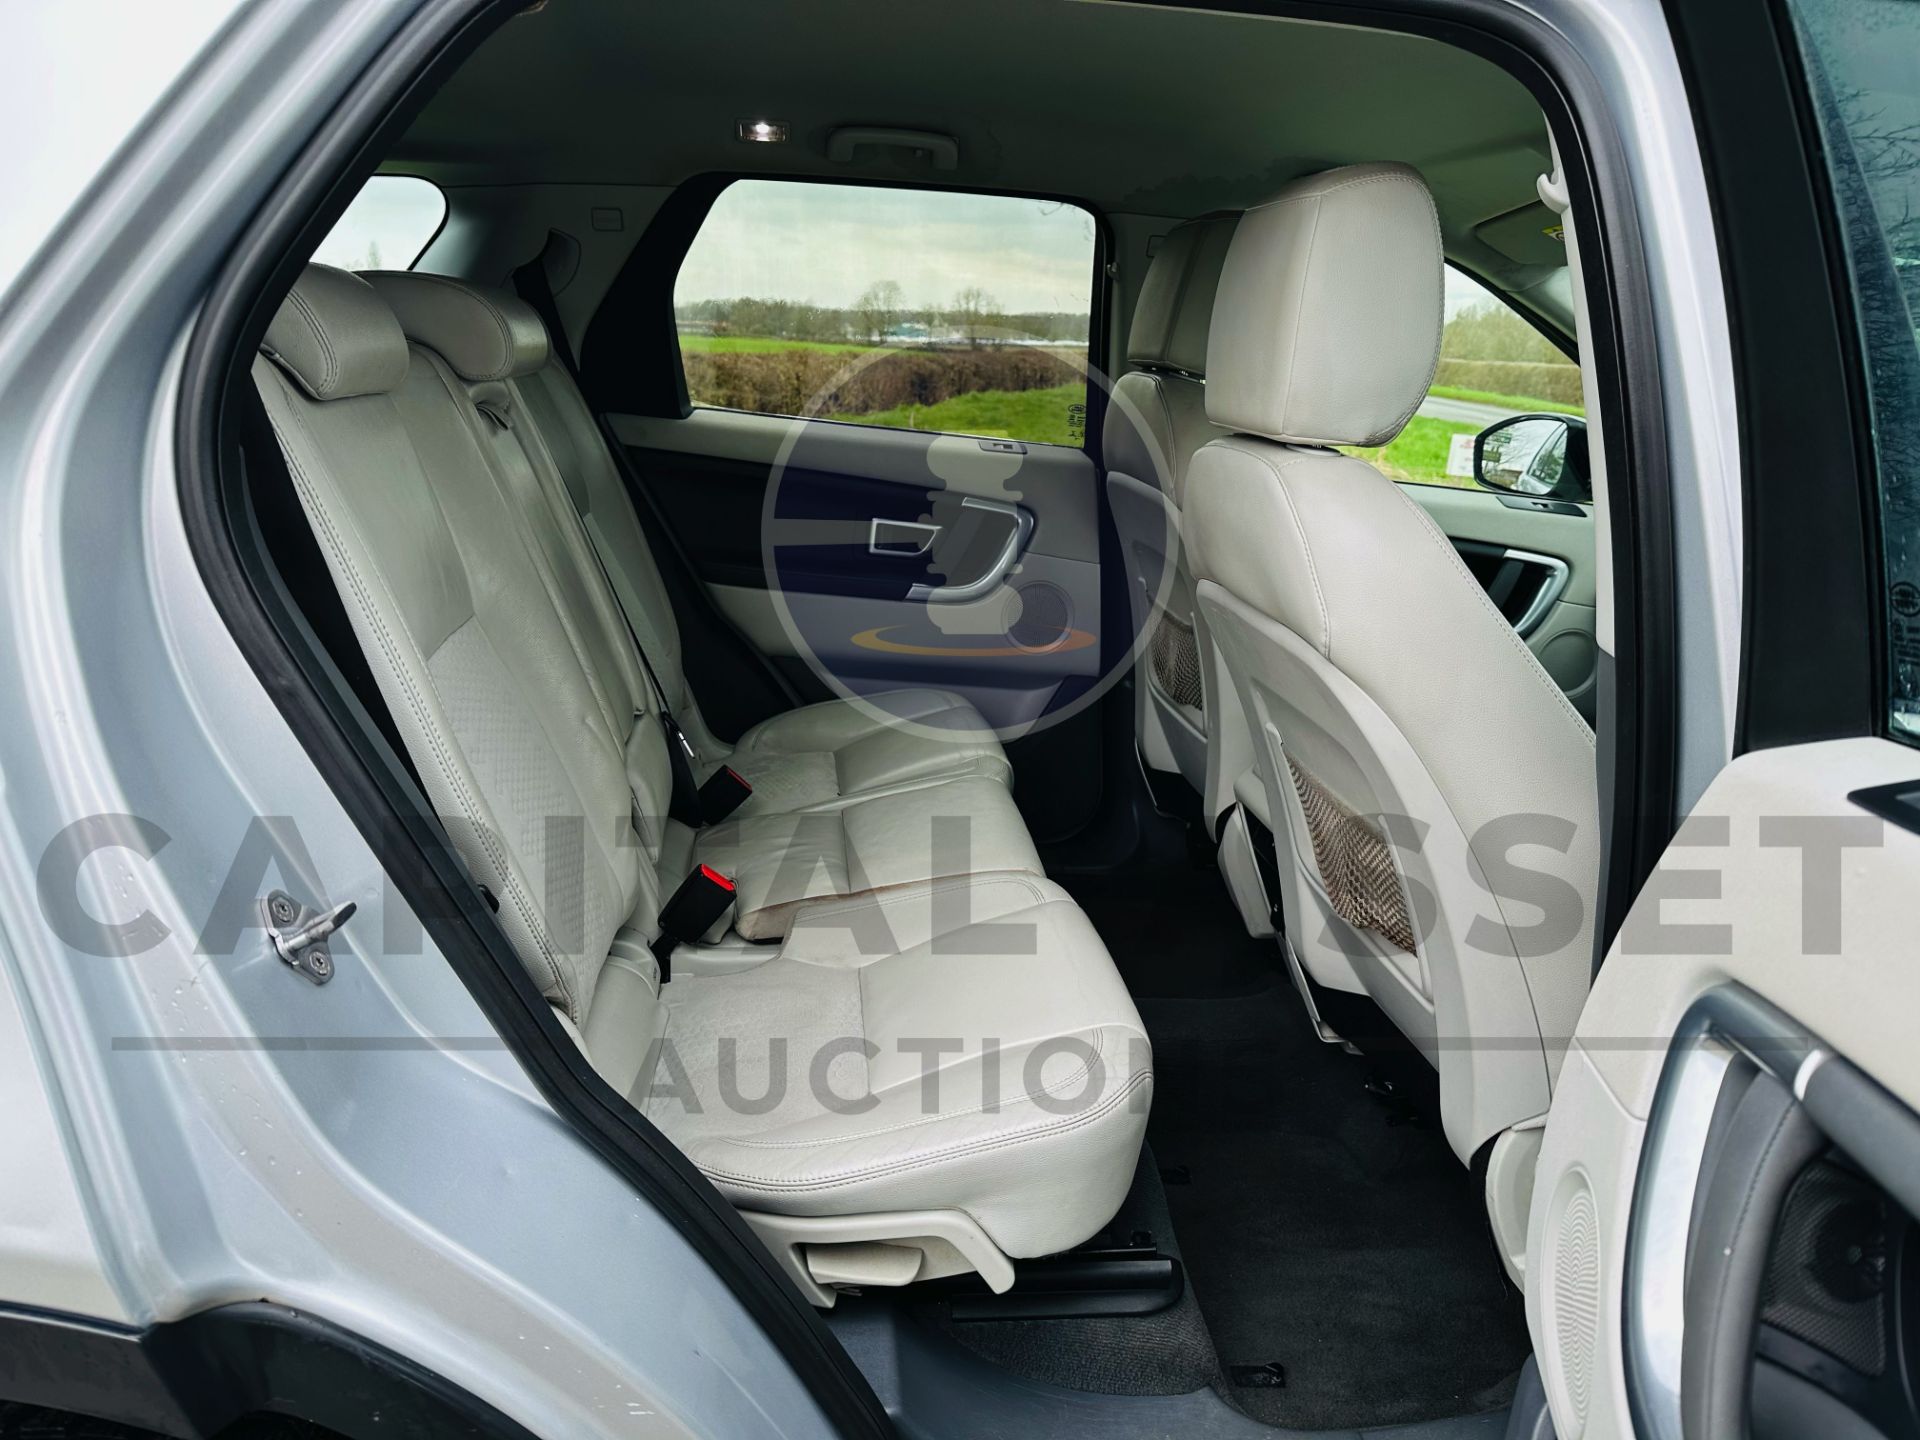 LAND ROVER DISCOVERY SPORT *SE TECH* 7 SEATER SUV (65 REG - EURO 6) 2.0 TD4 - AUTOMATIC - Image 11 of 38